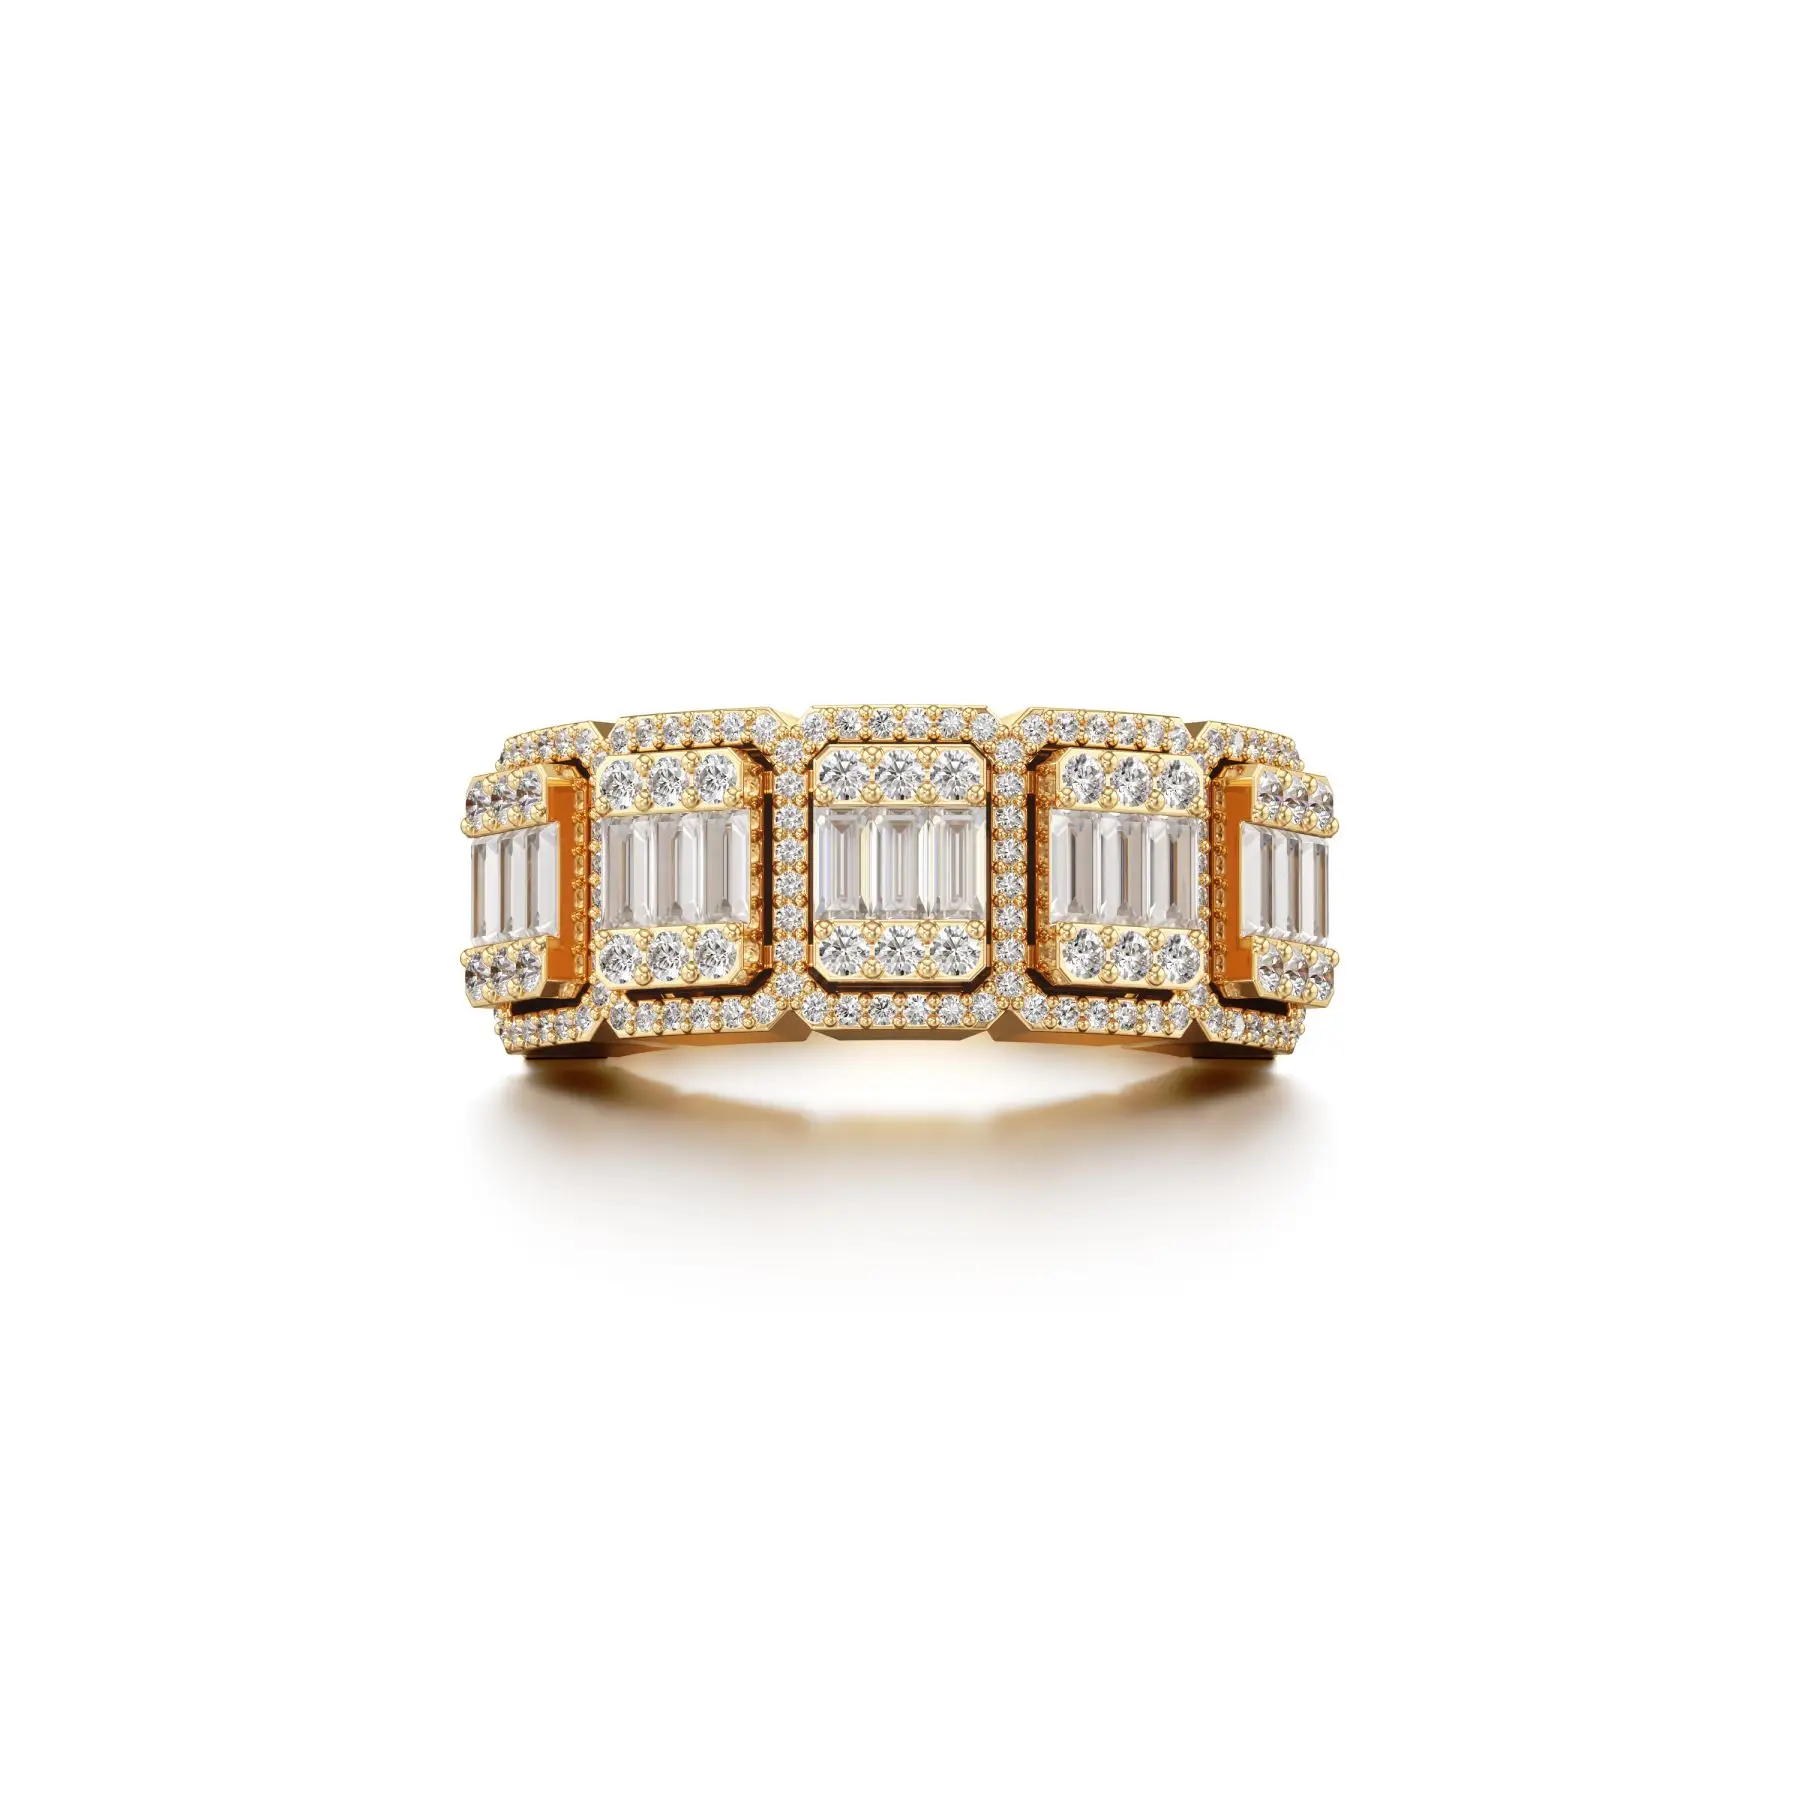 Triumphant Shimmer Diamond Ring in Yellow 10k Gold